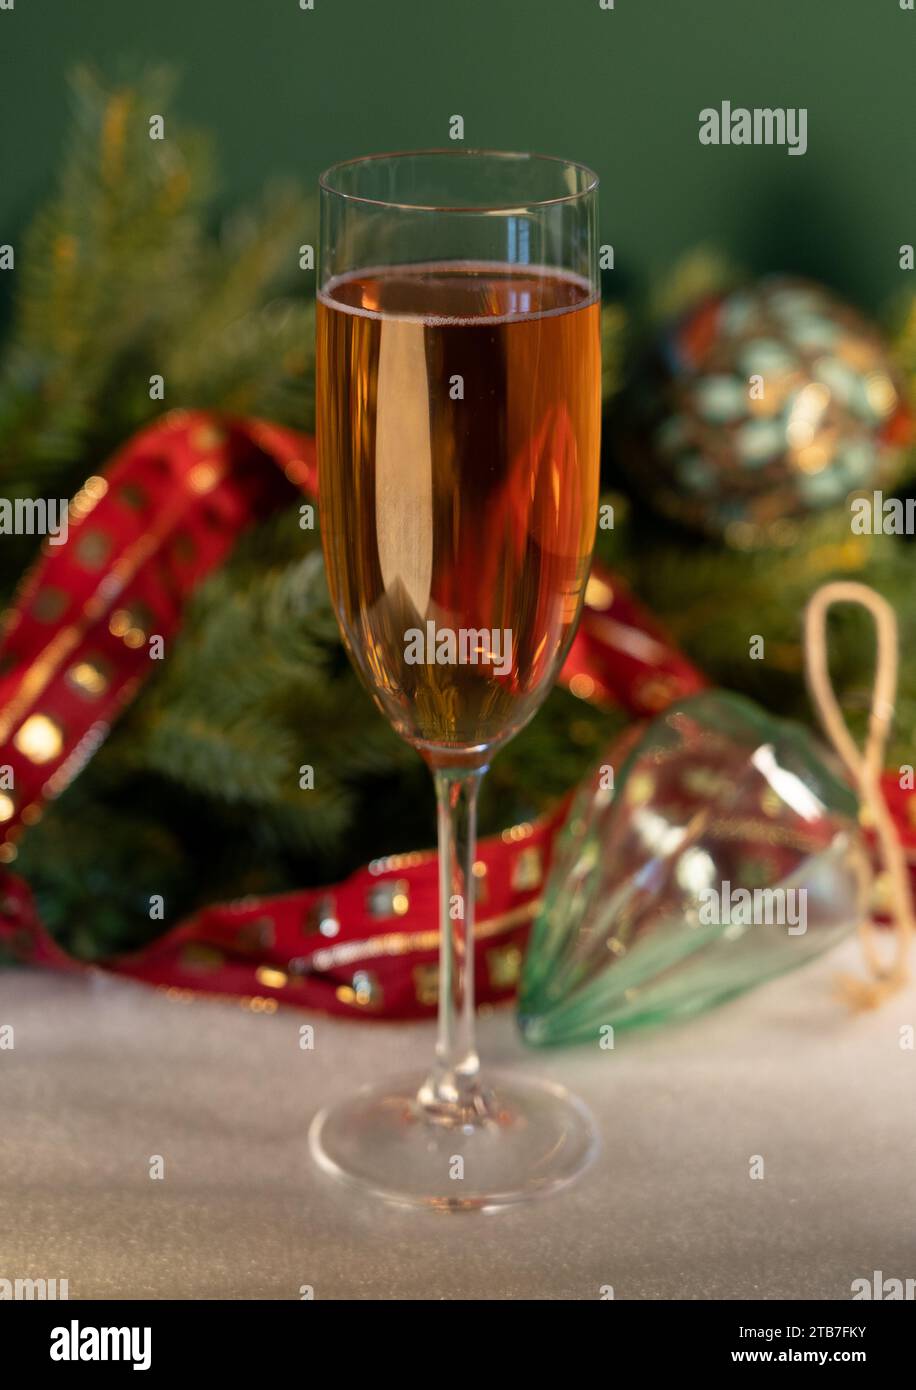 Tall glass of champagne in front of green background with Christmas tree foliage, glass baubles with a red ribbon on white fabric Stock Photo